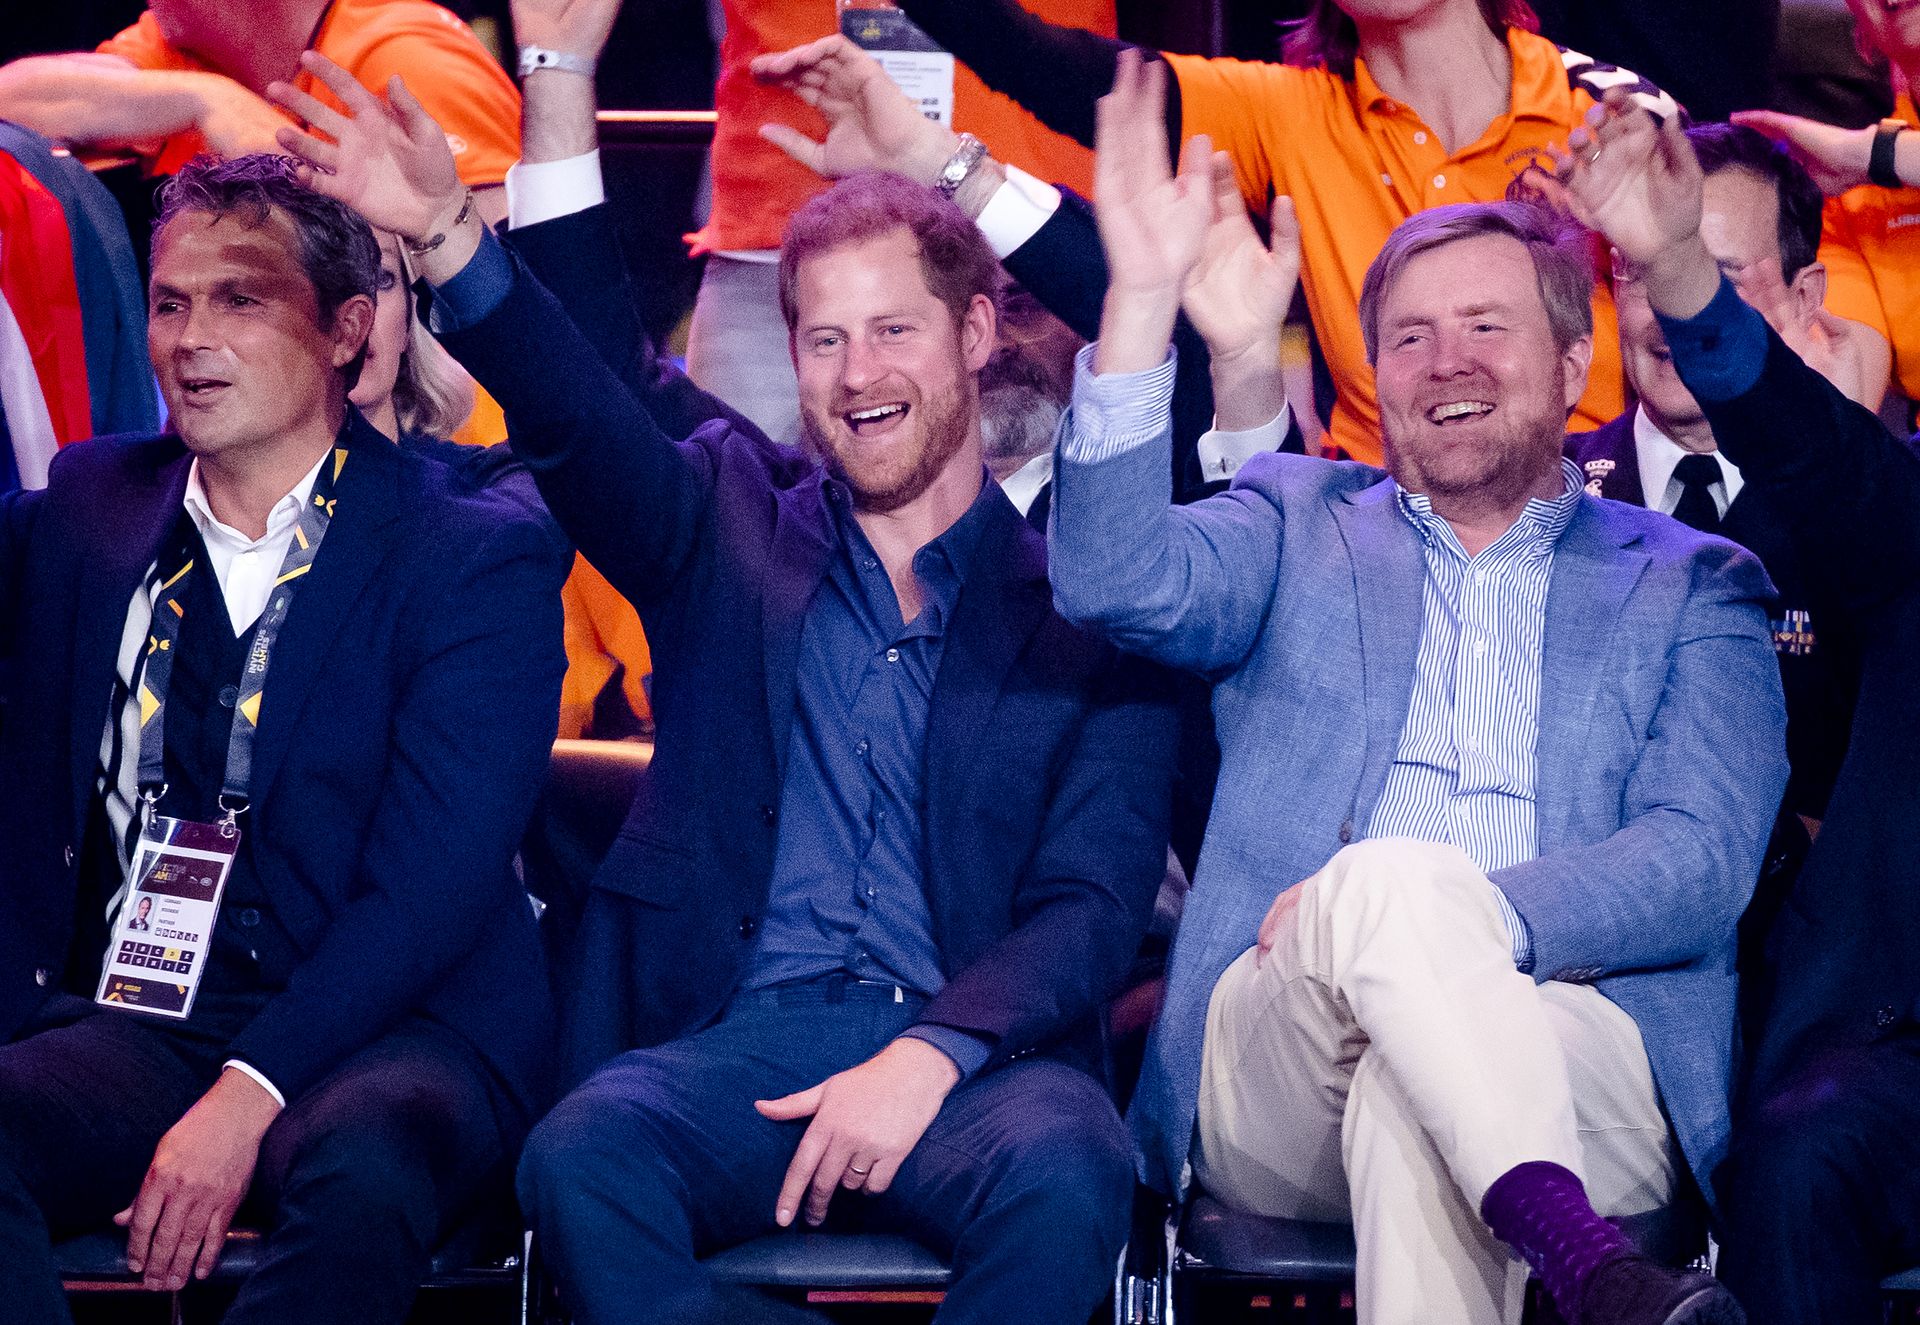 Willem-Alexander and Harry fans